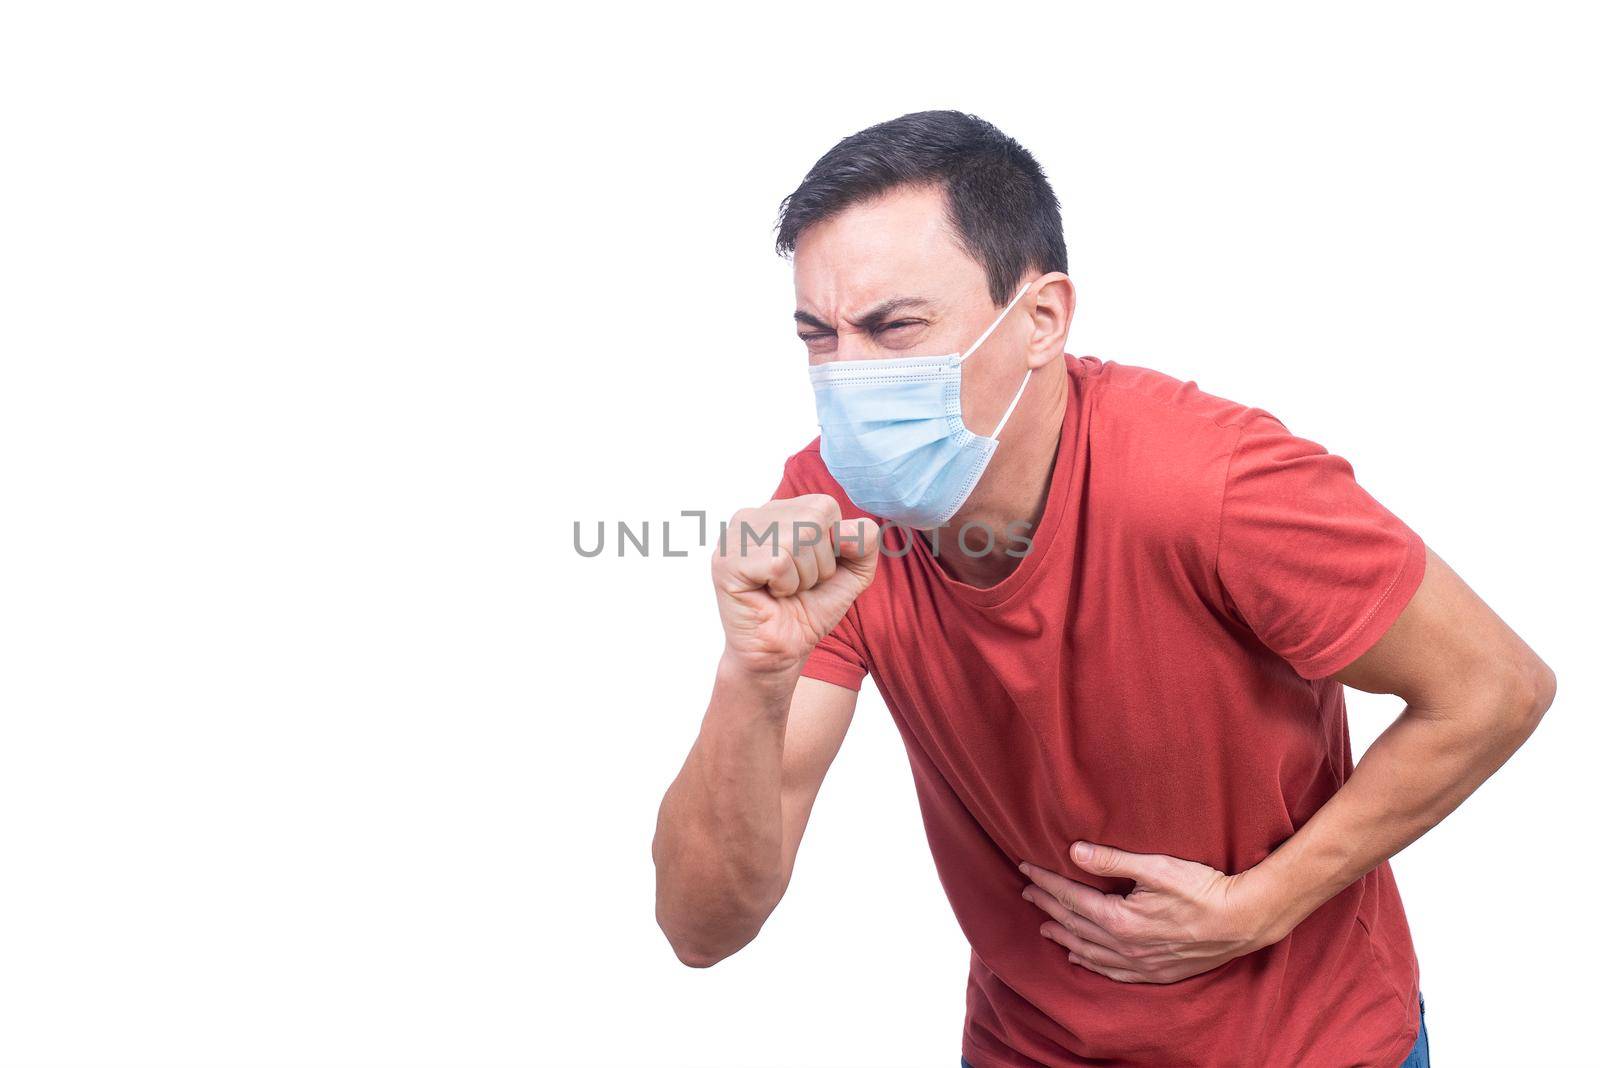 Man in medical mask coughing during COVID pandemic by ivanmoreno